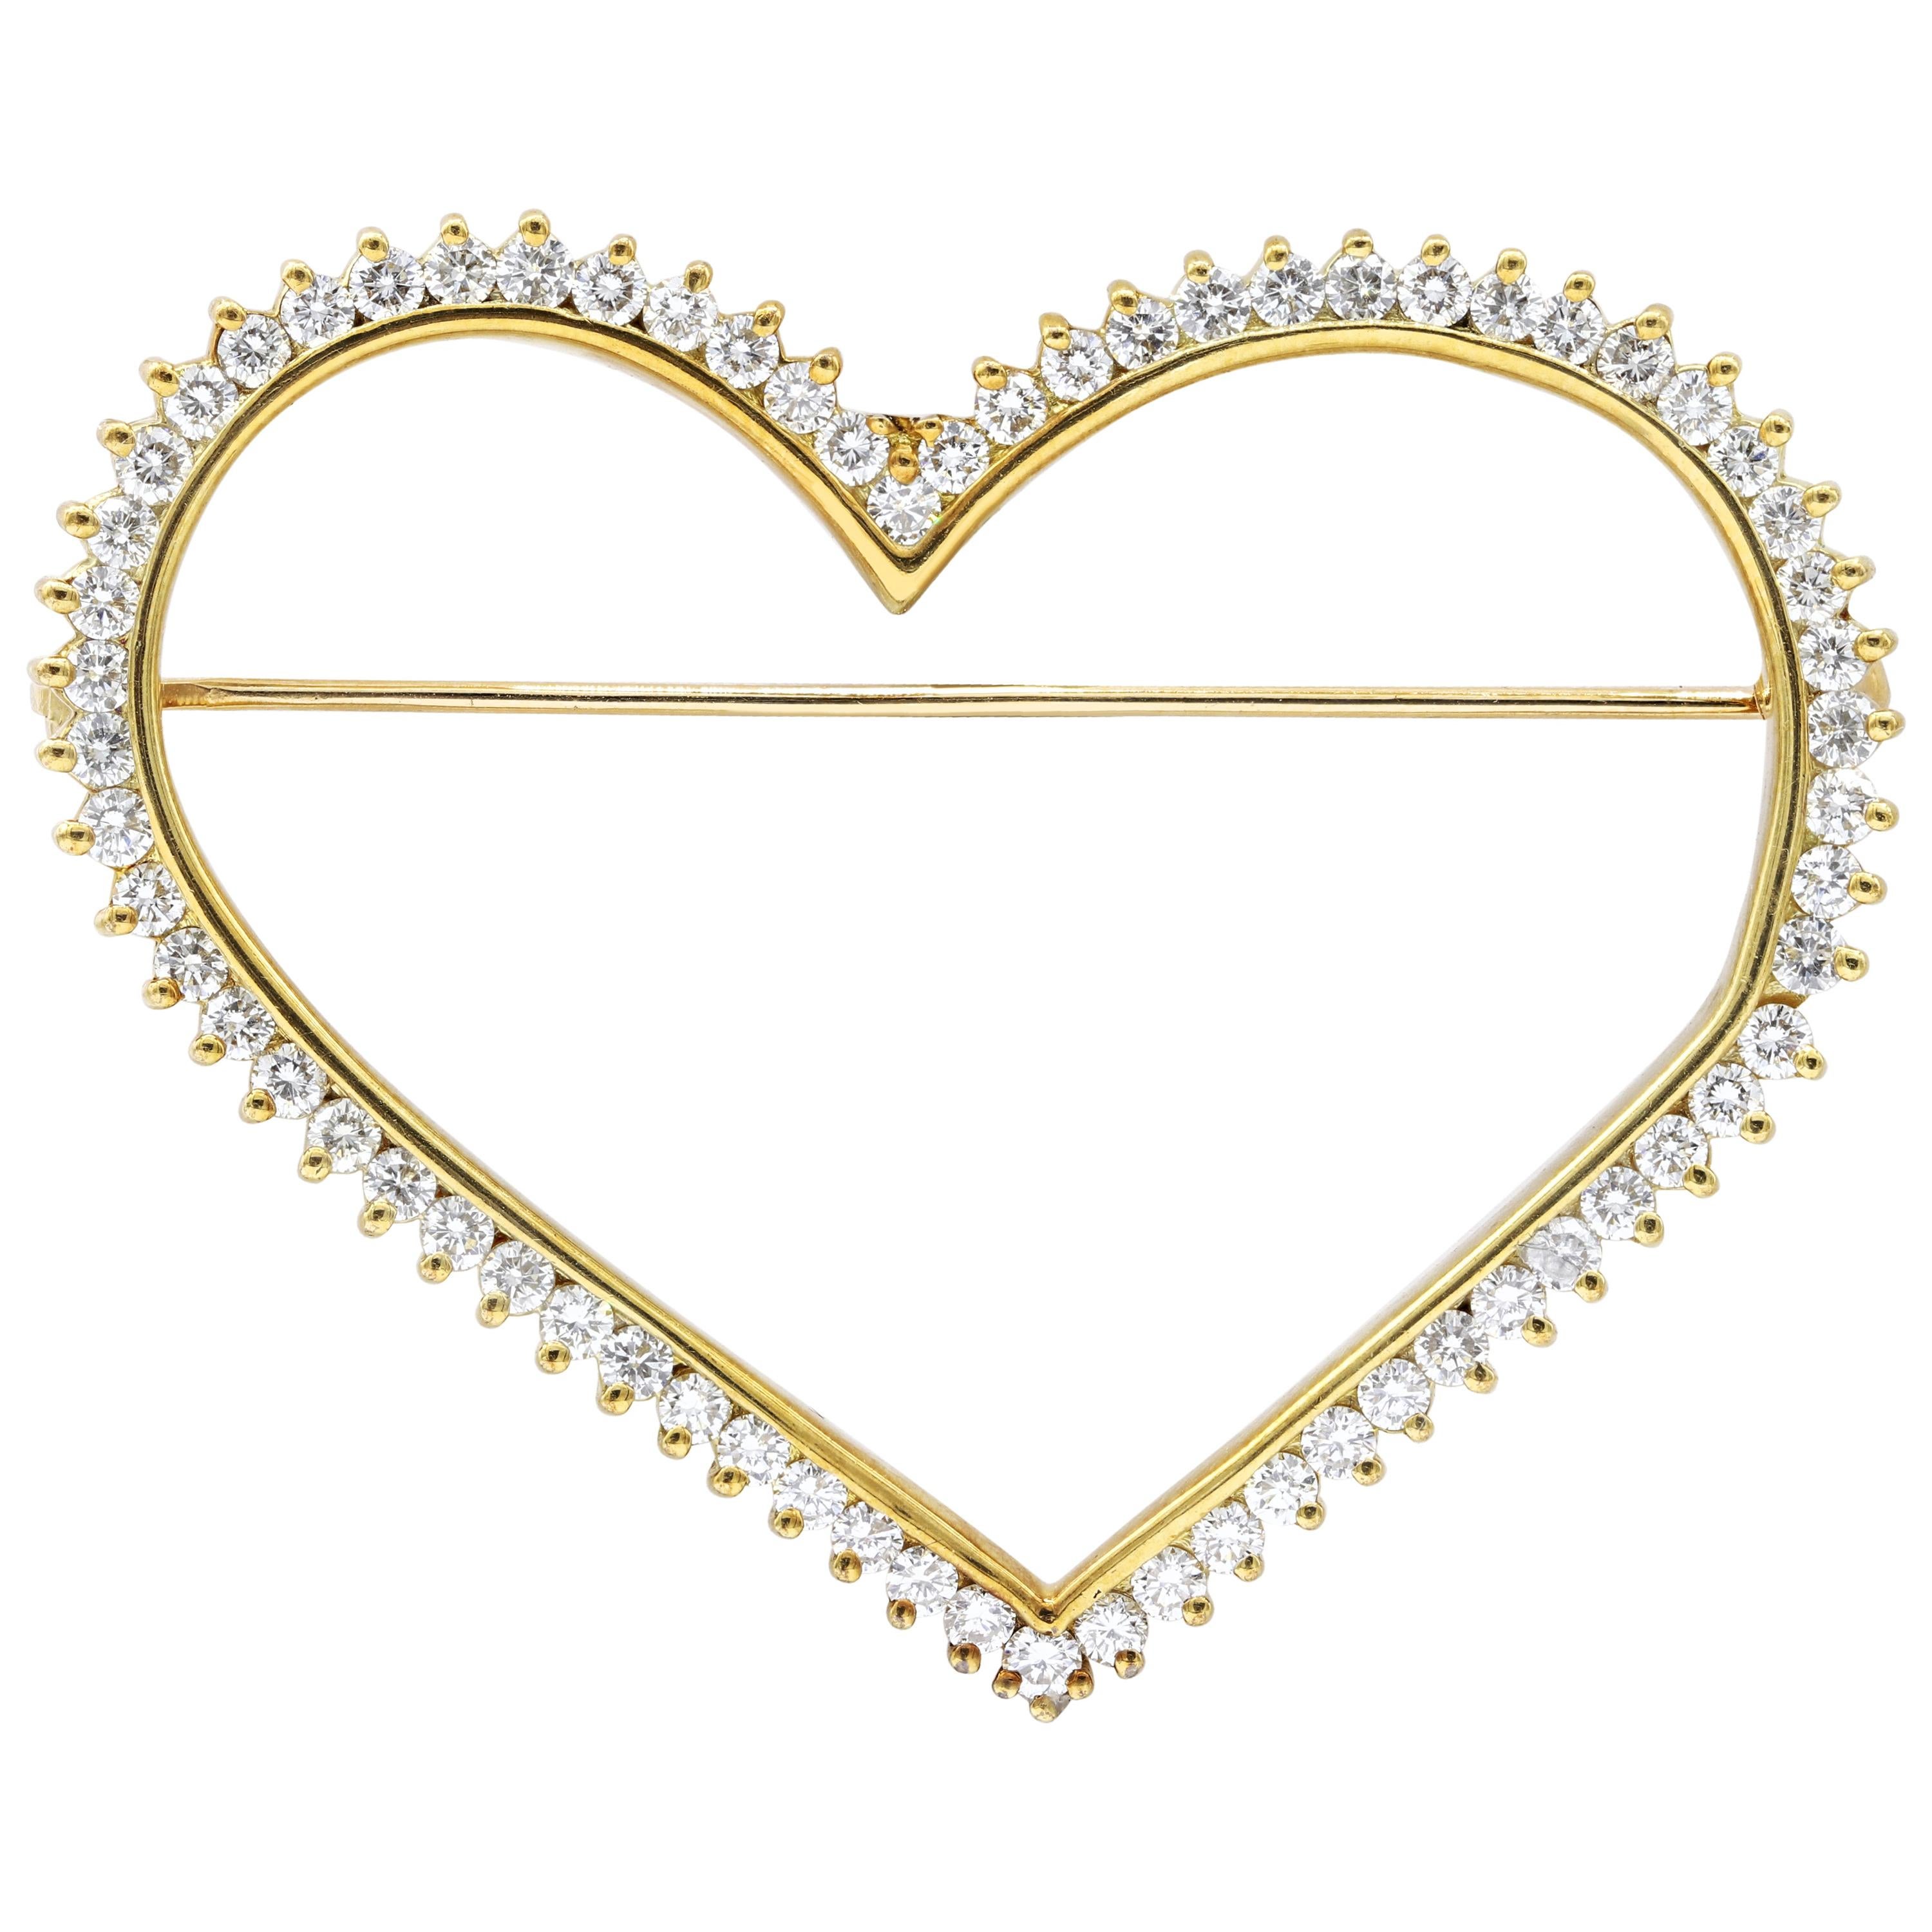 Yellow Gold Heart Shape Brooch Features Diamonds For Sale